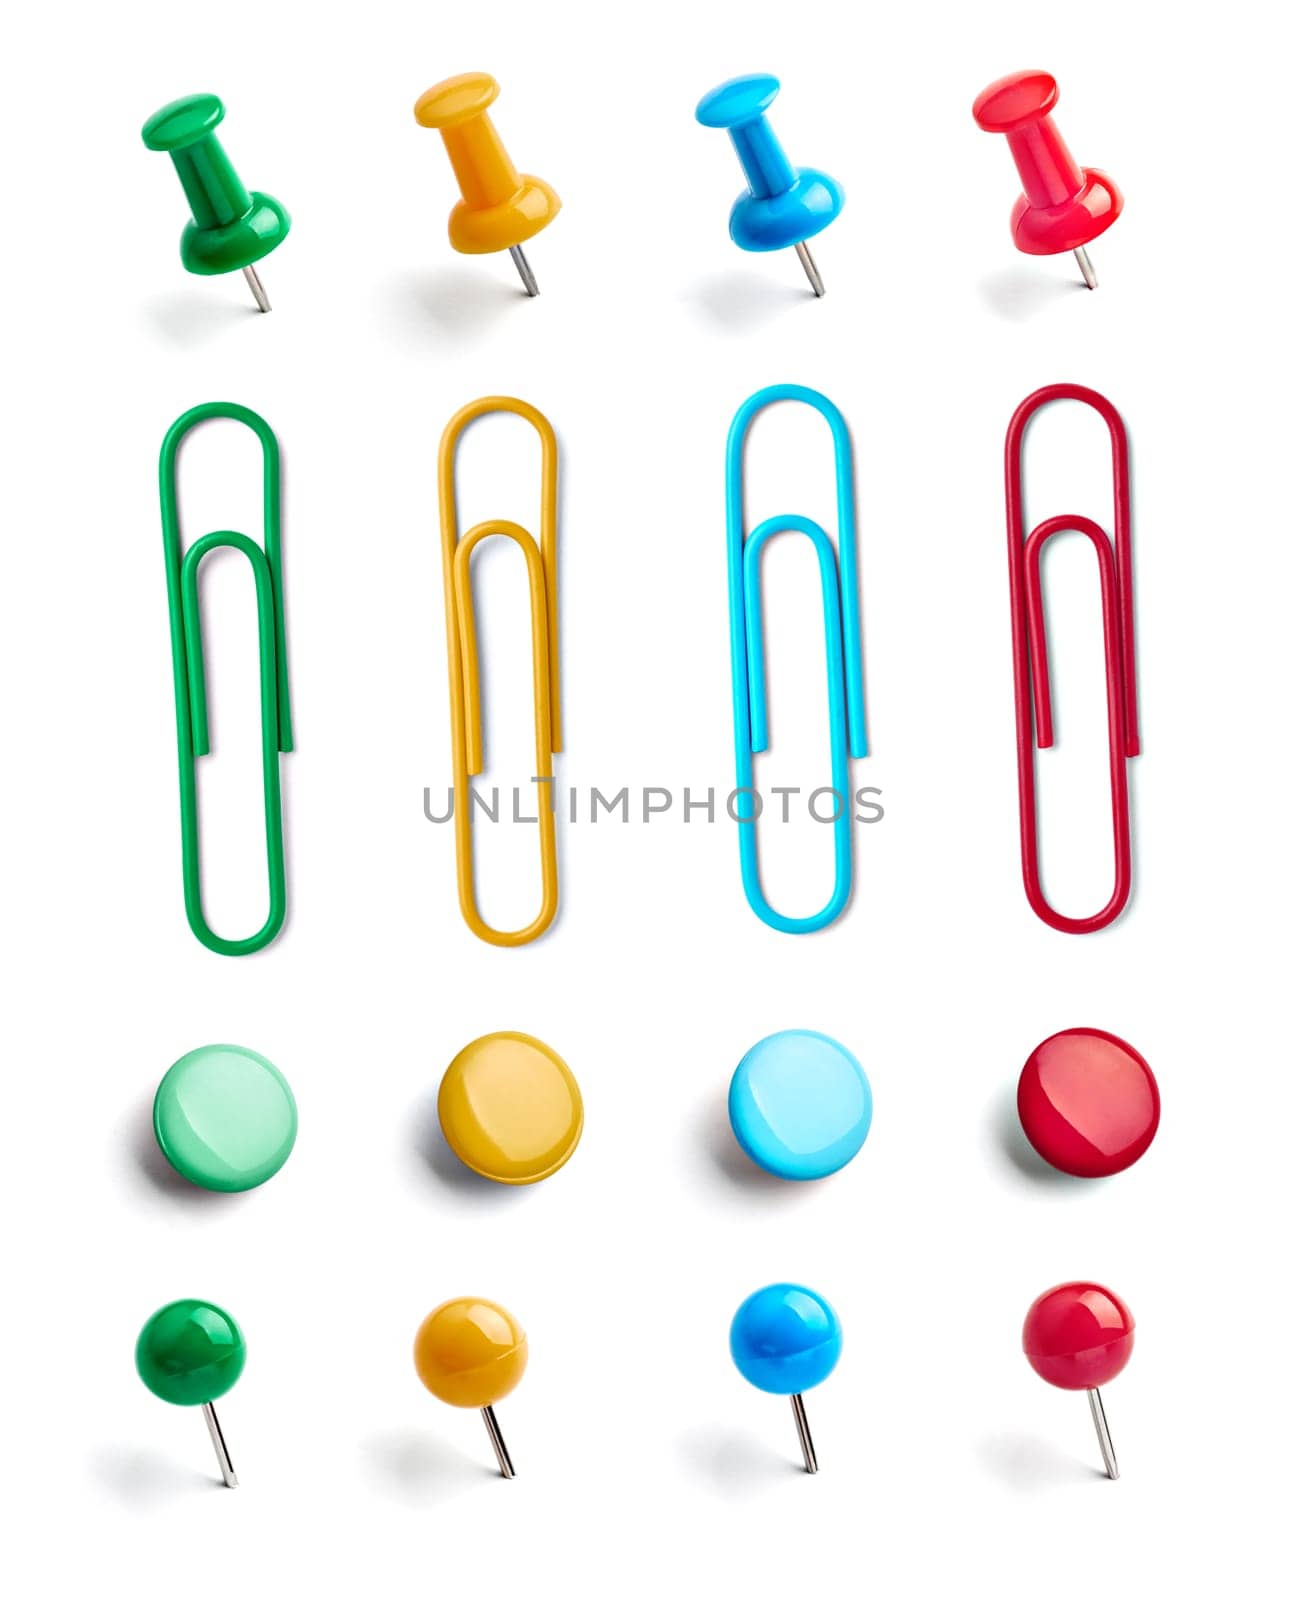 push pin paper clip thumbtack note office by Picsfive